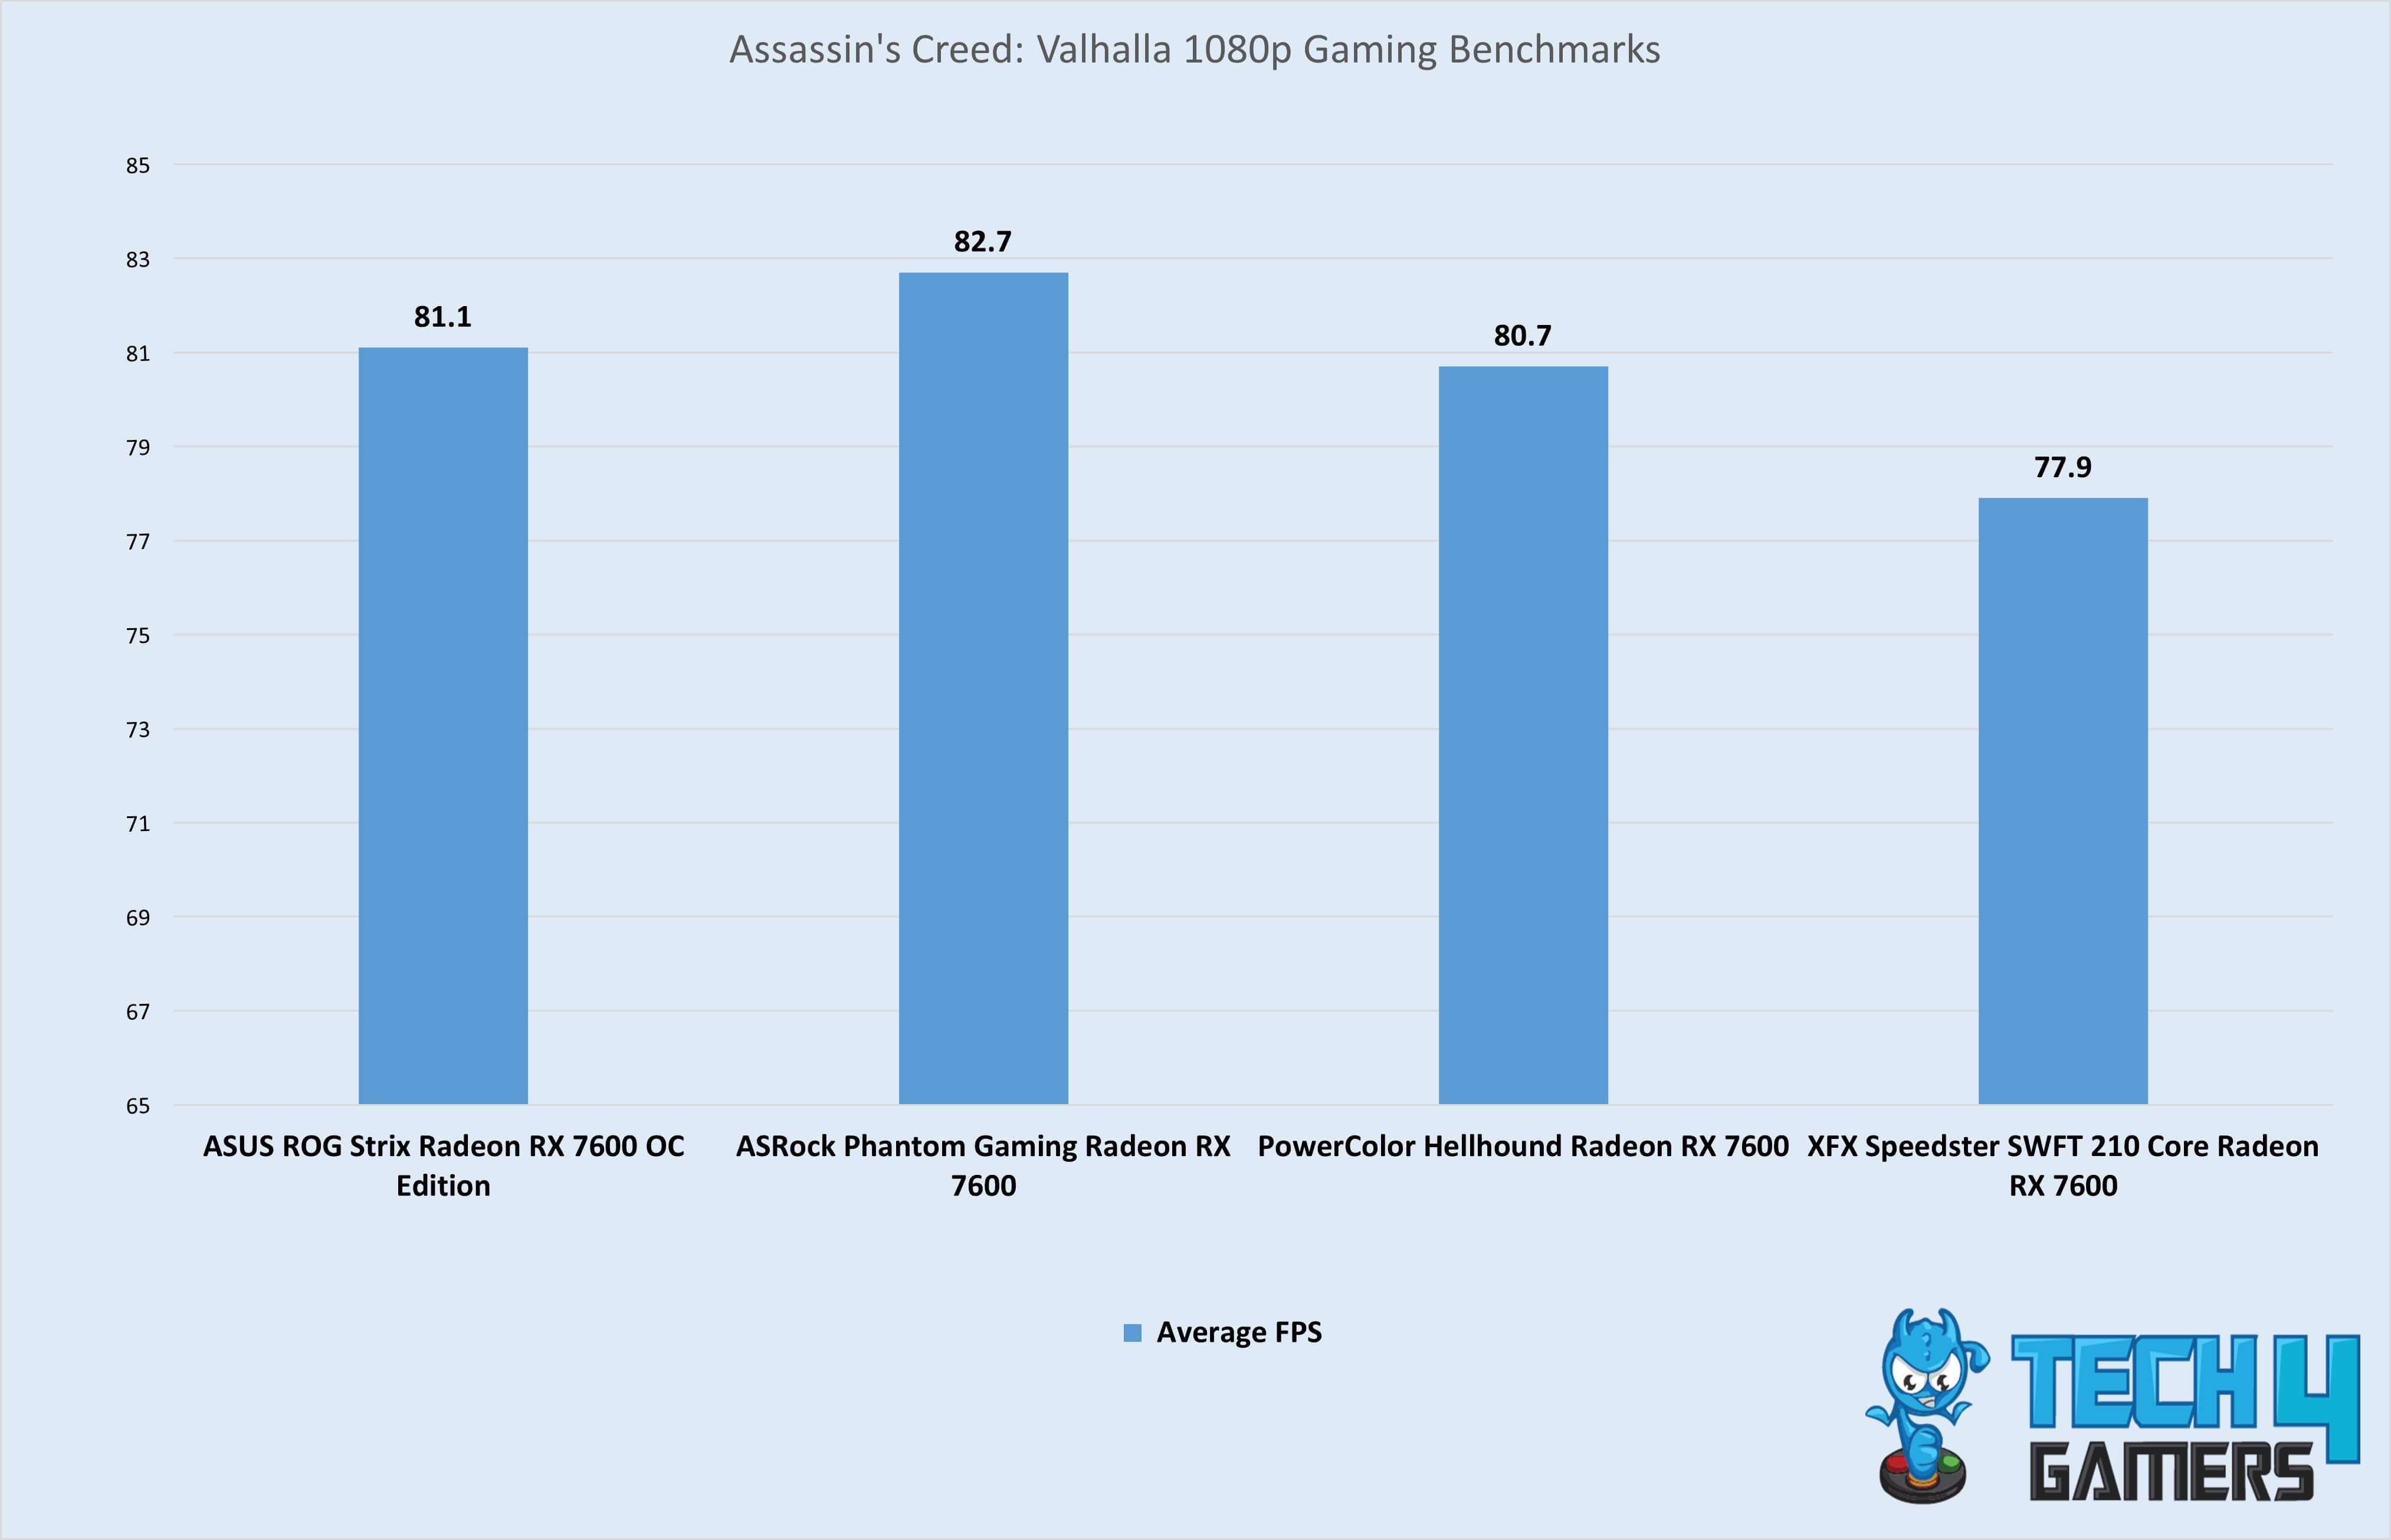 Assassin's Creed Valhalla 1080p Gaming Benchmarks